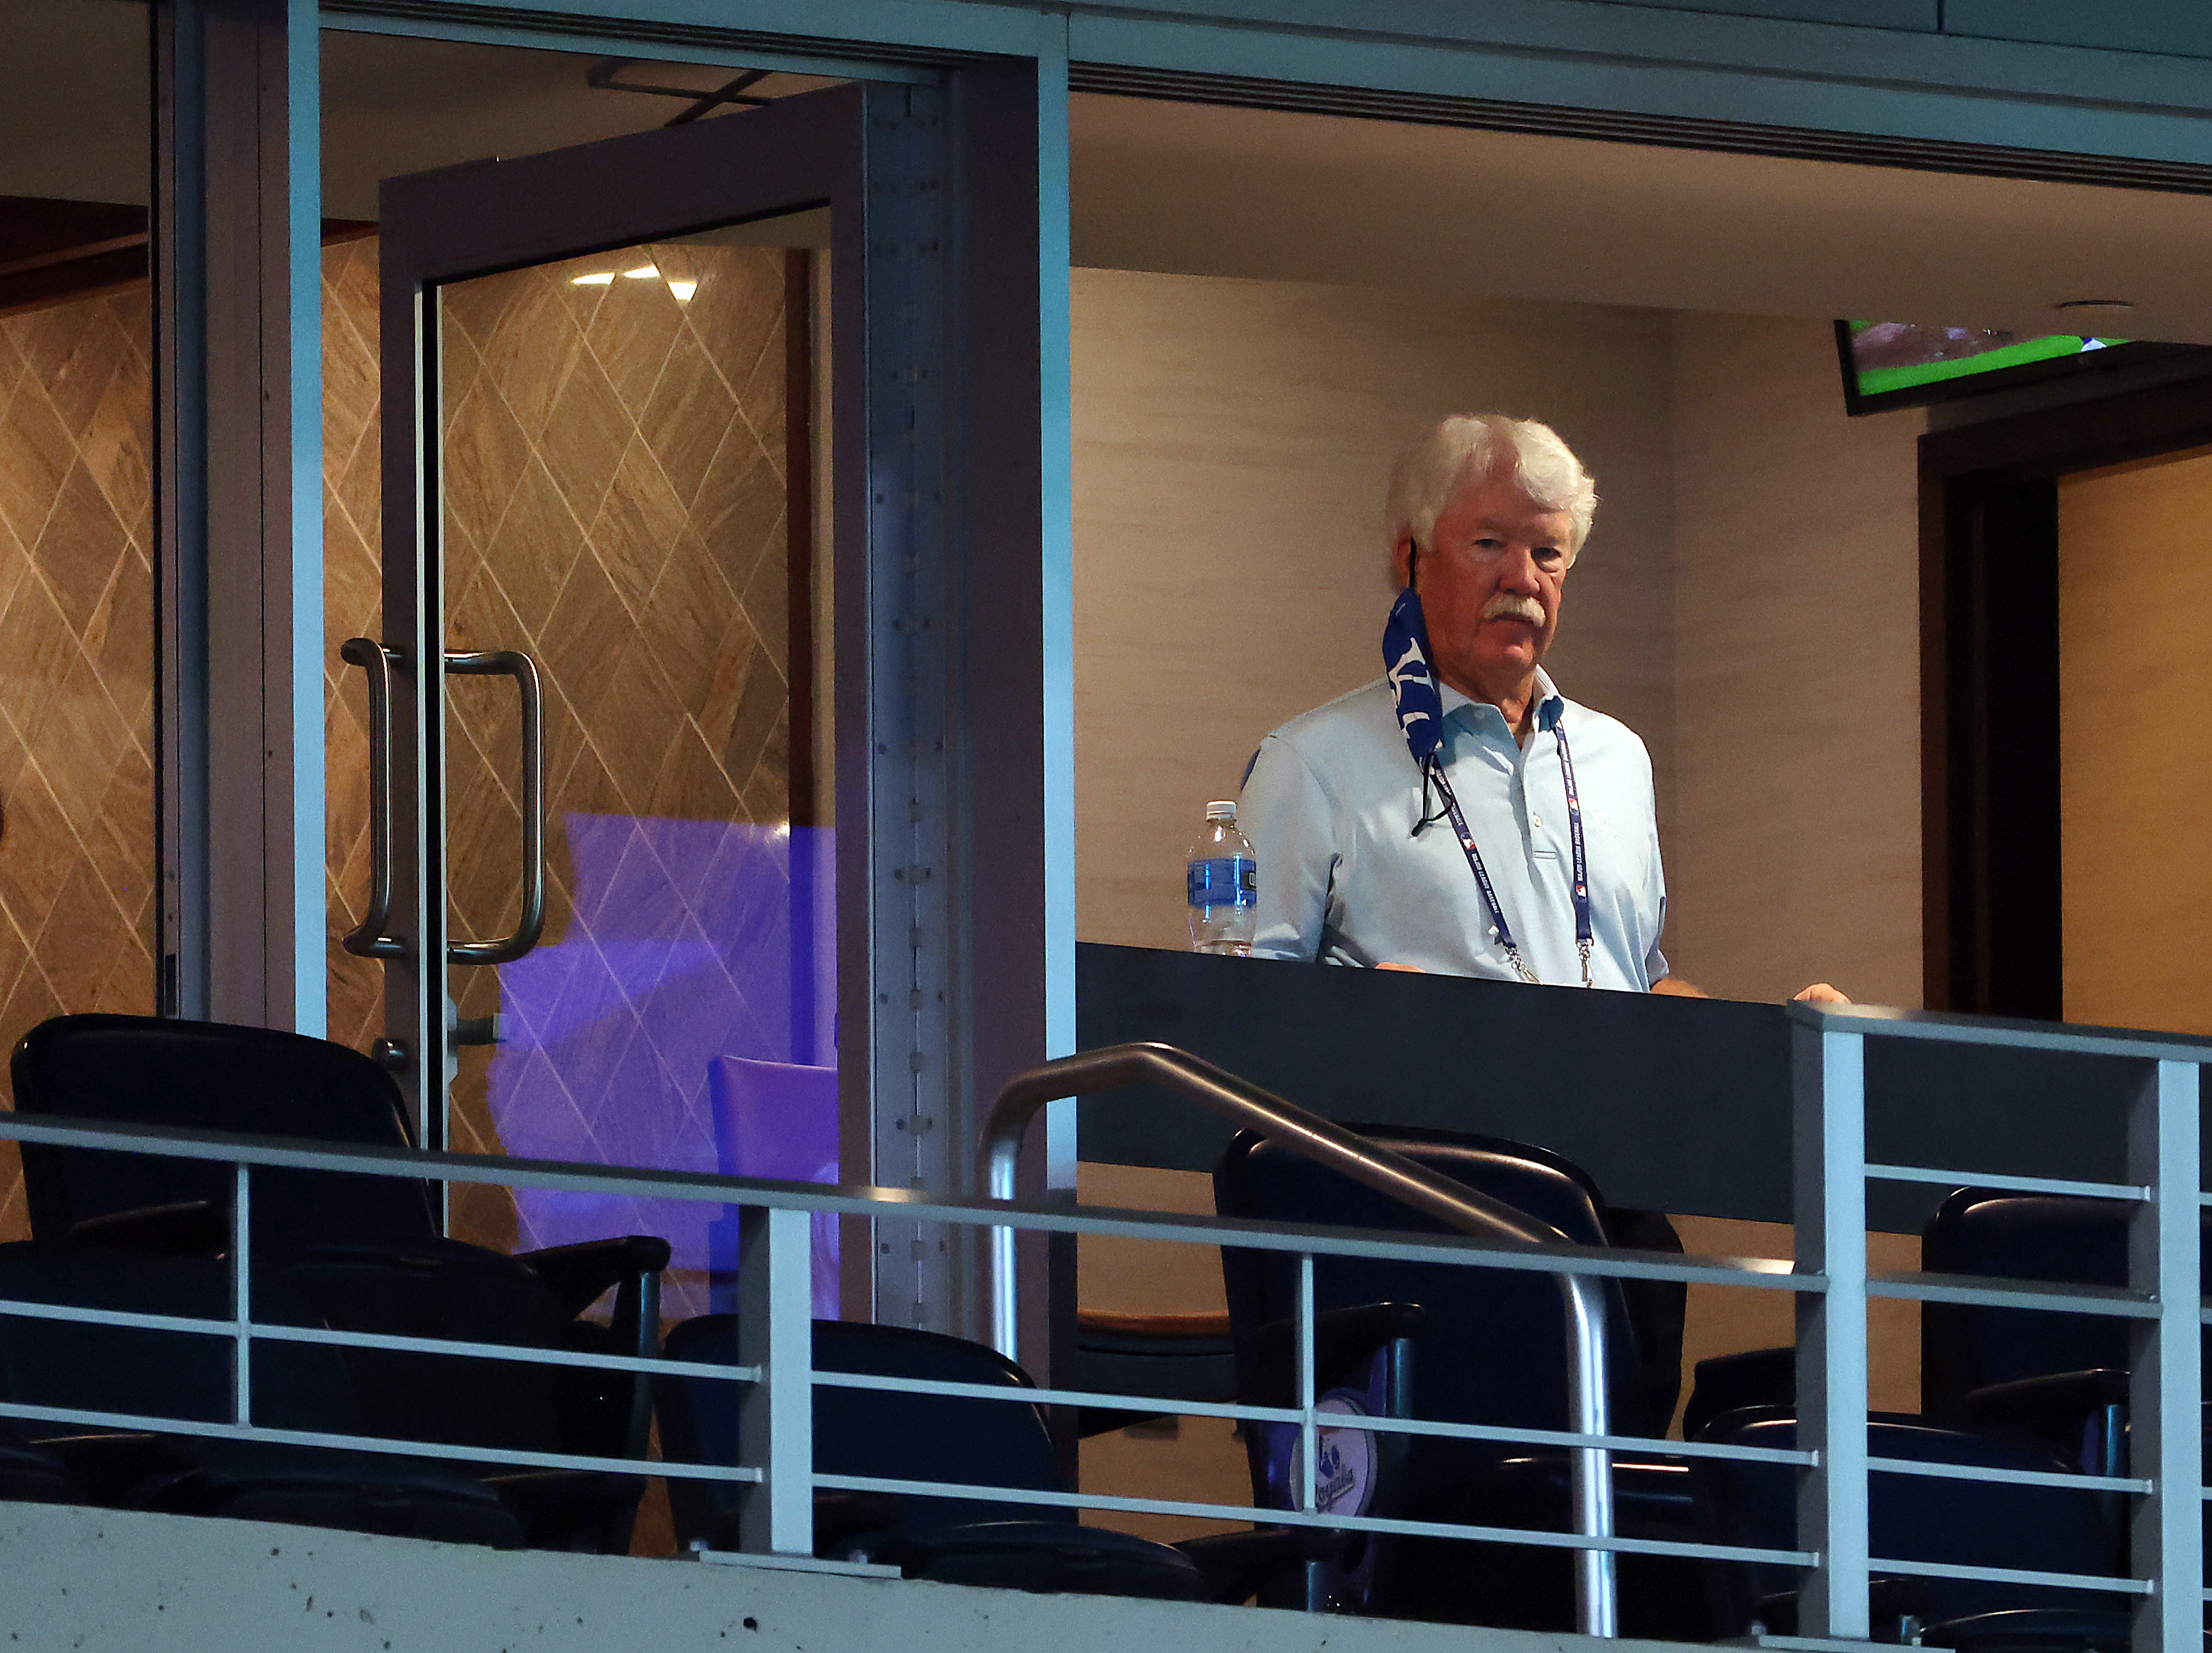 Kansas City Royals owner John Sherman watches from the owner’s box during the game against the Cleveland Indians at Kauffman Stadium on September 01, 2020 in Kansas City, Missouri.